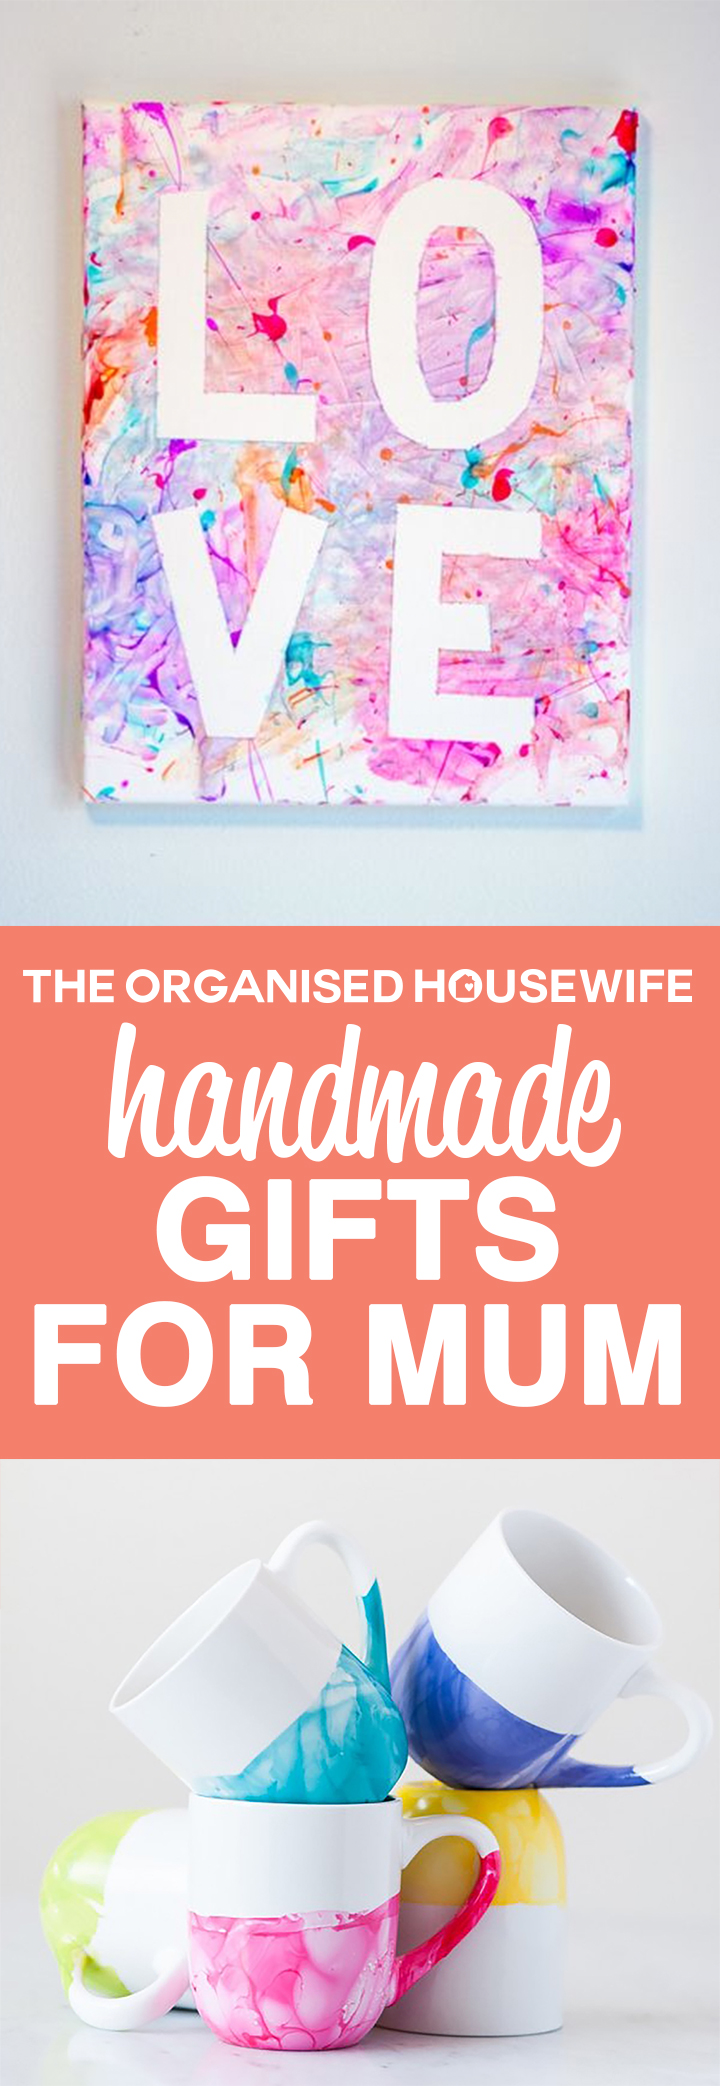 A handmade gift stands out from the rest and nothing says love more than a gift made with thought and care! Handmade Gifts for mum the kids can make.